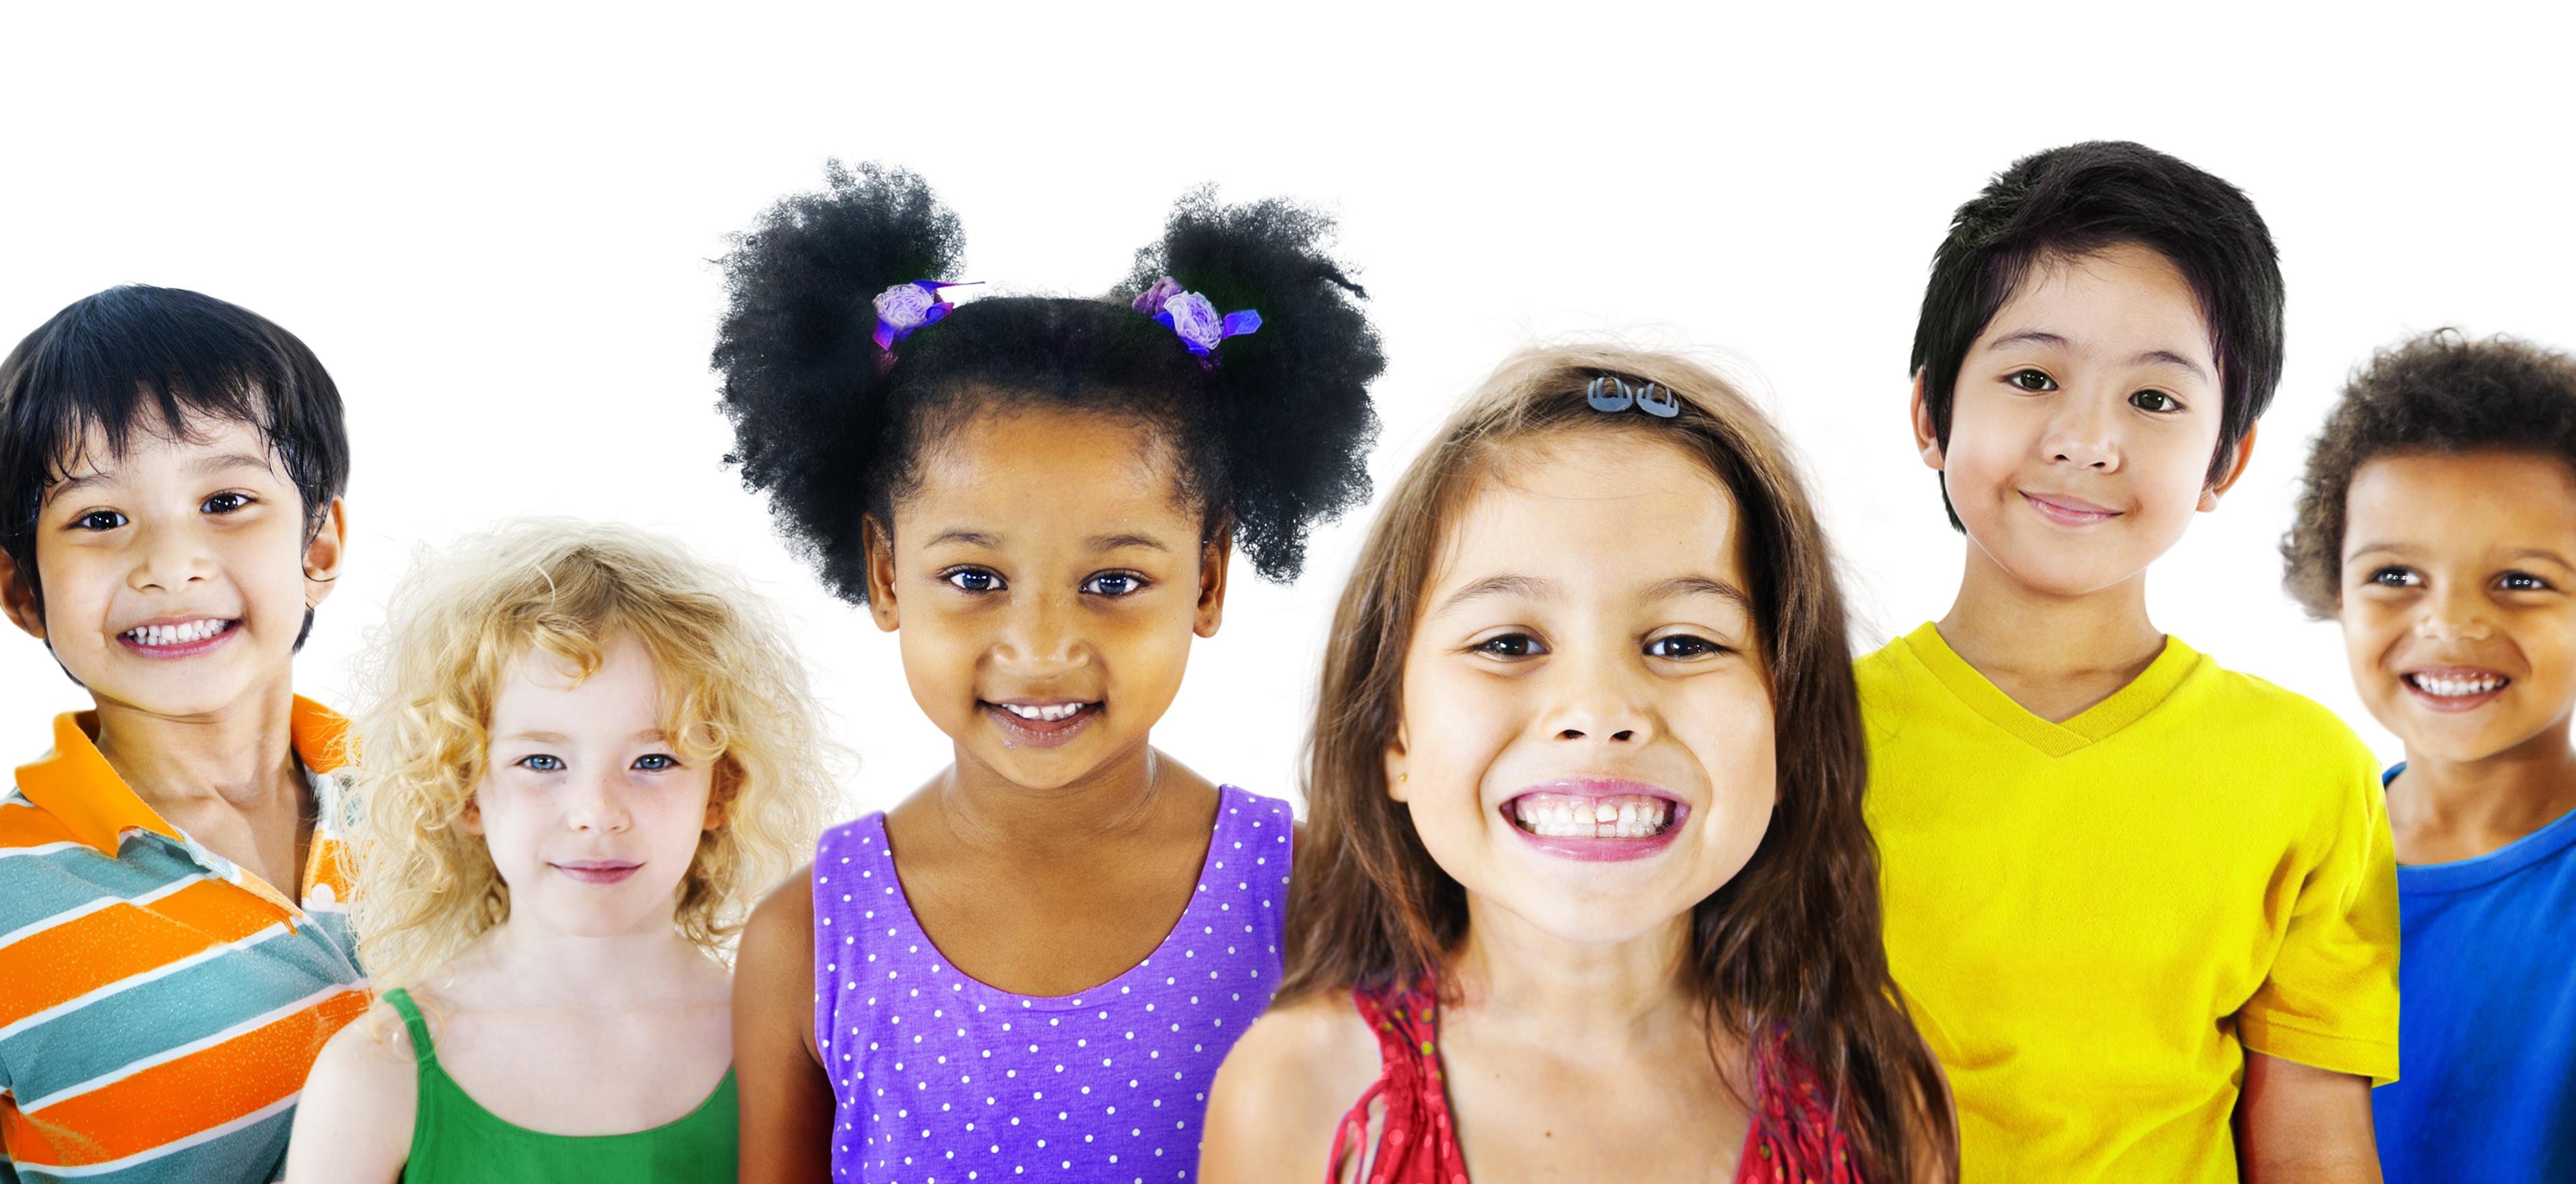 Smiling faces of diverse kids